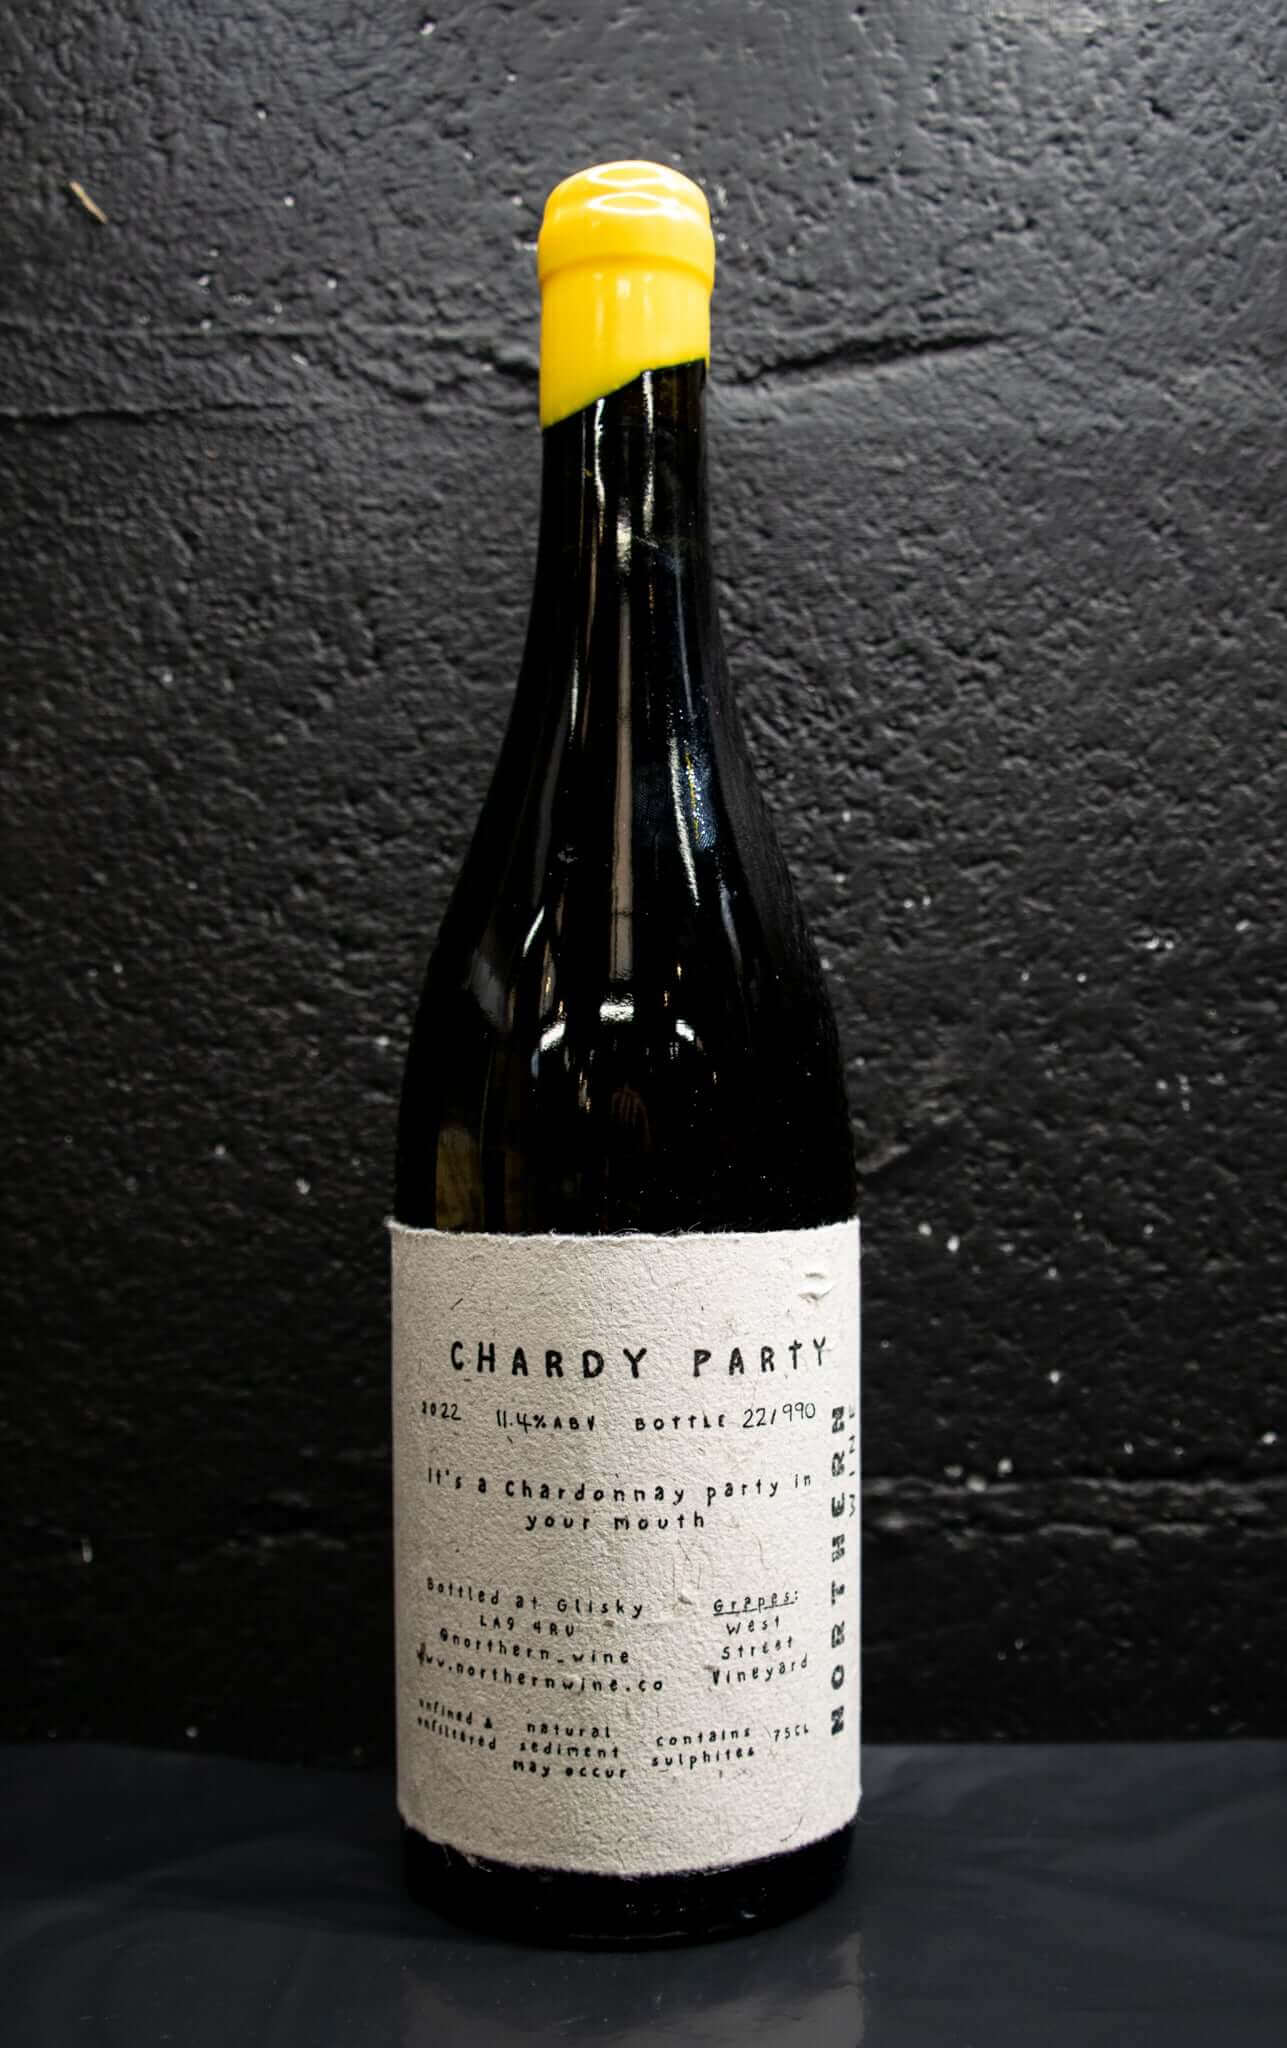 Chardy Party back label